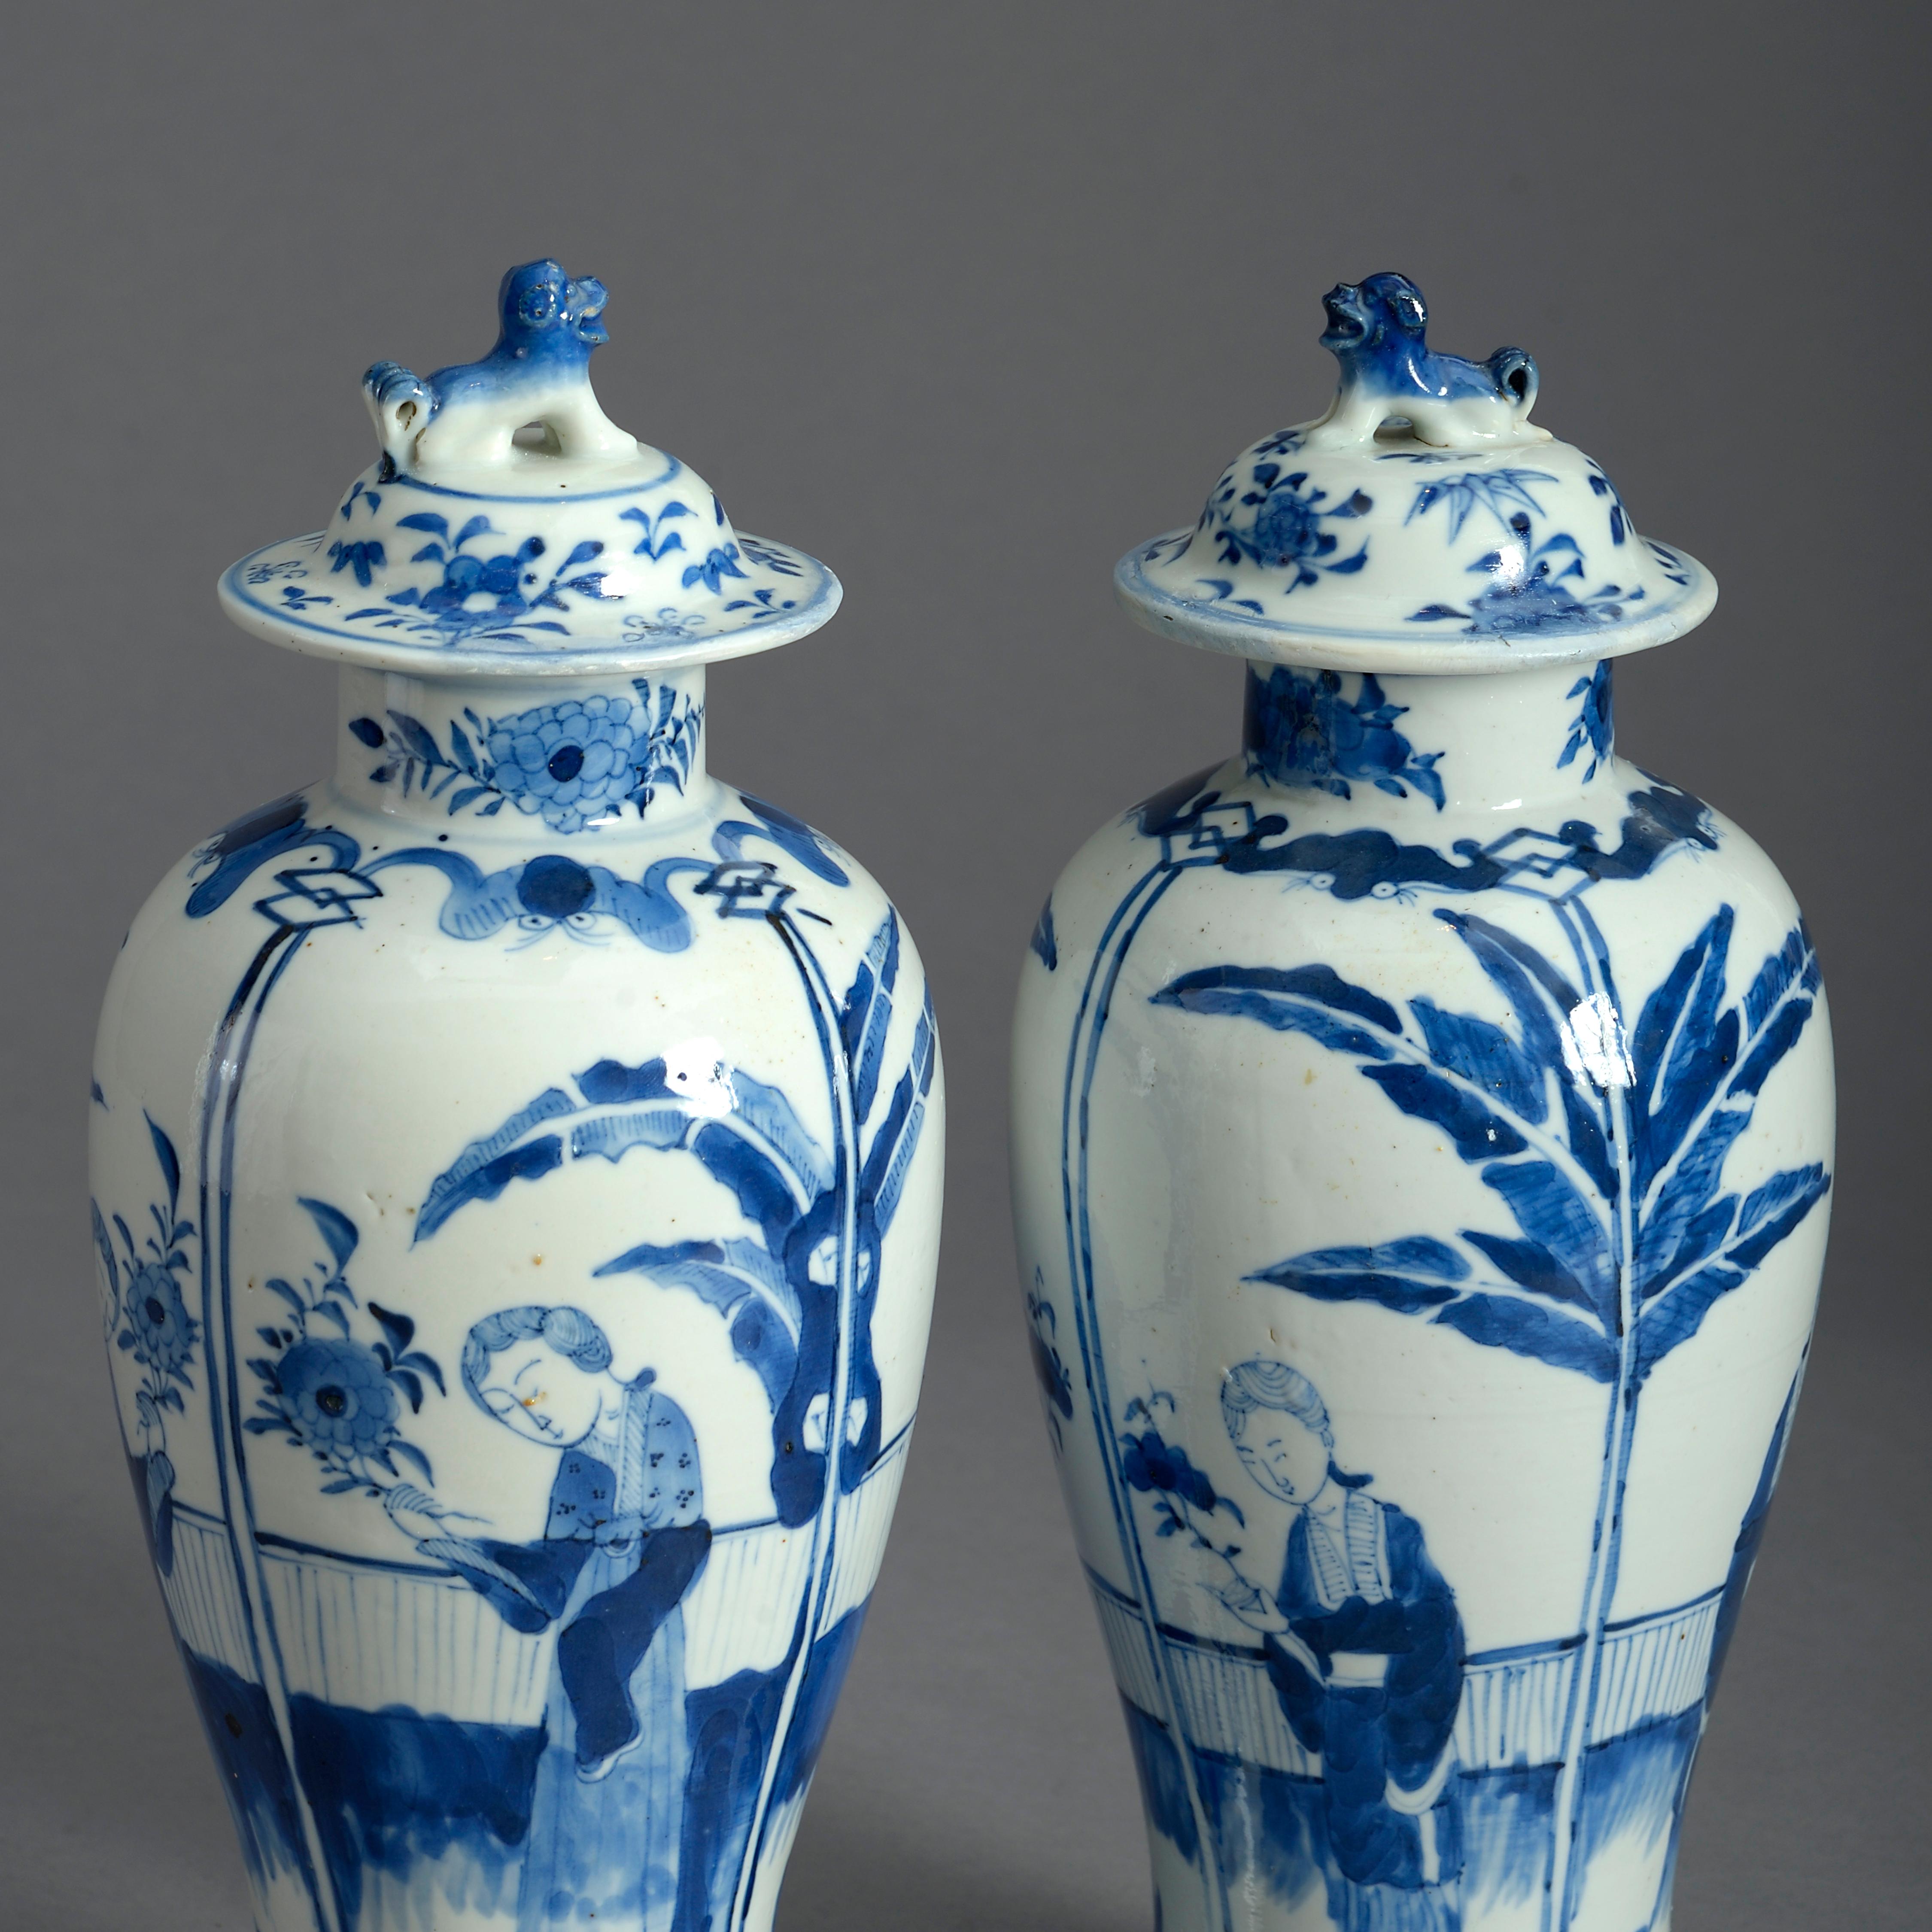 Chinese Export Pair of 19th Century Blue and White Porcelain Vases and Covers in the Kangxi Tas